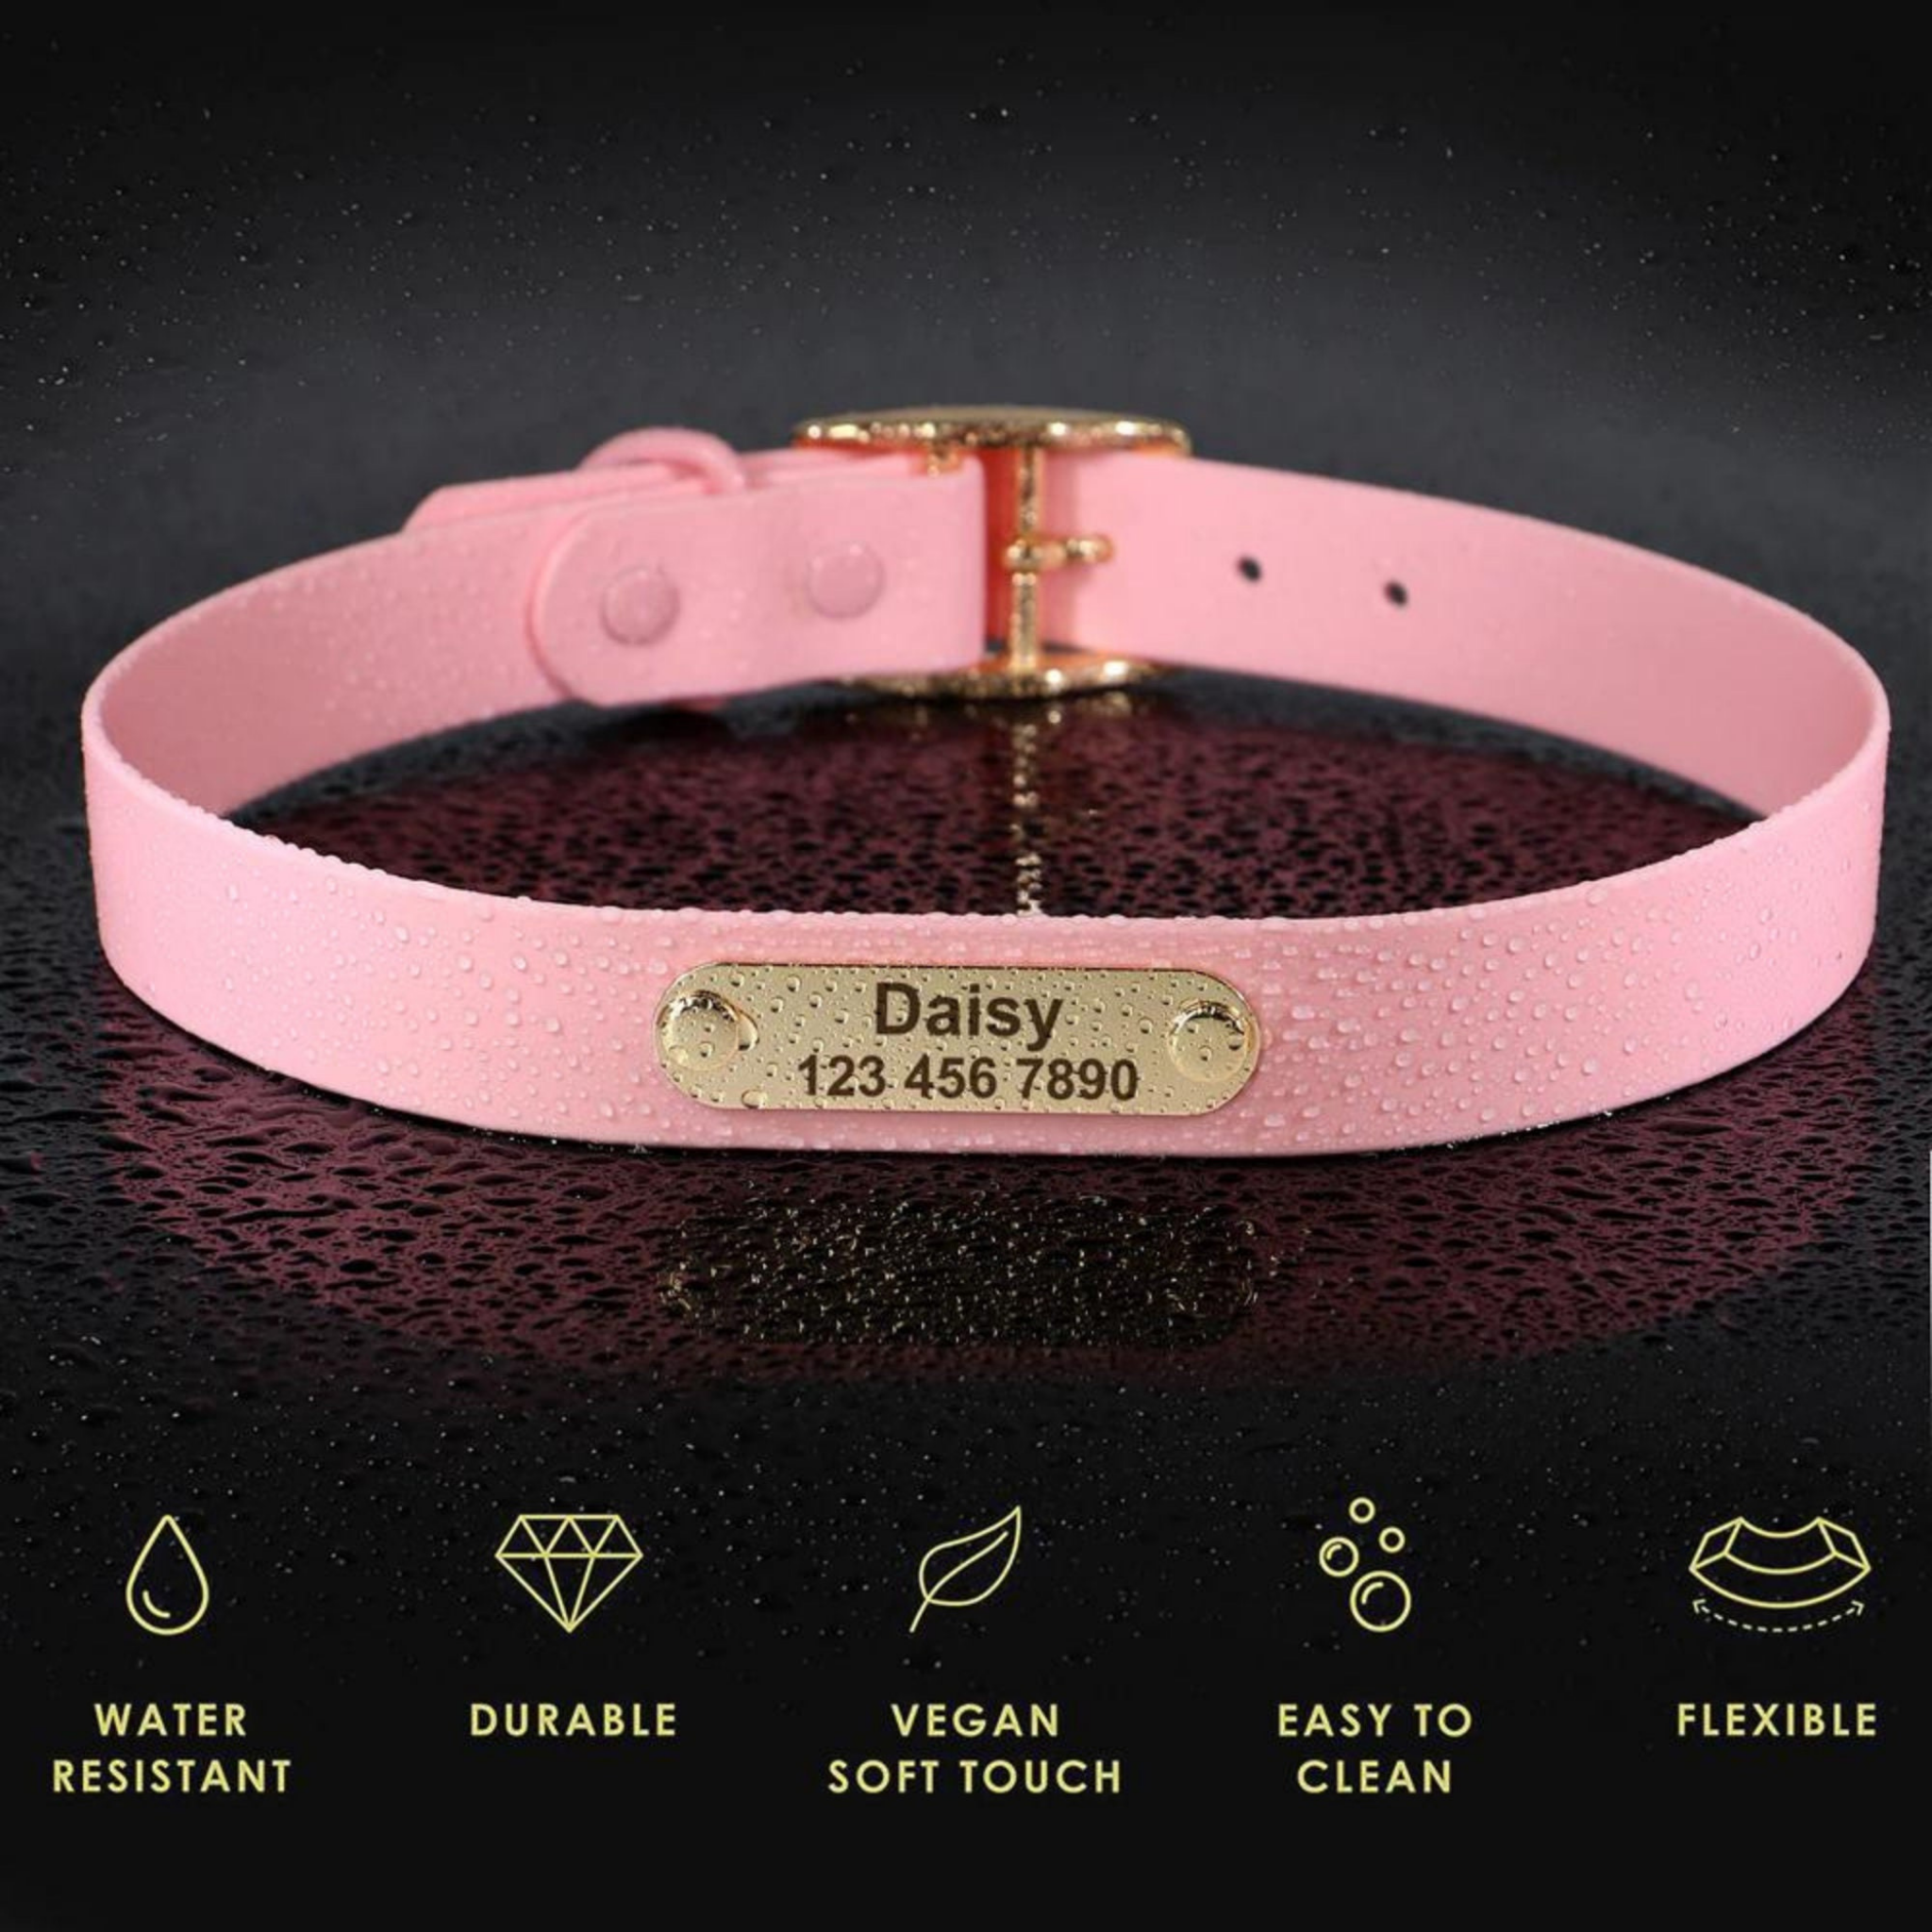 Custom engraved dog collars or leashes set for small and large dogs are made of high-quality water-proof PVC material